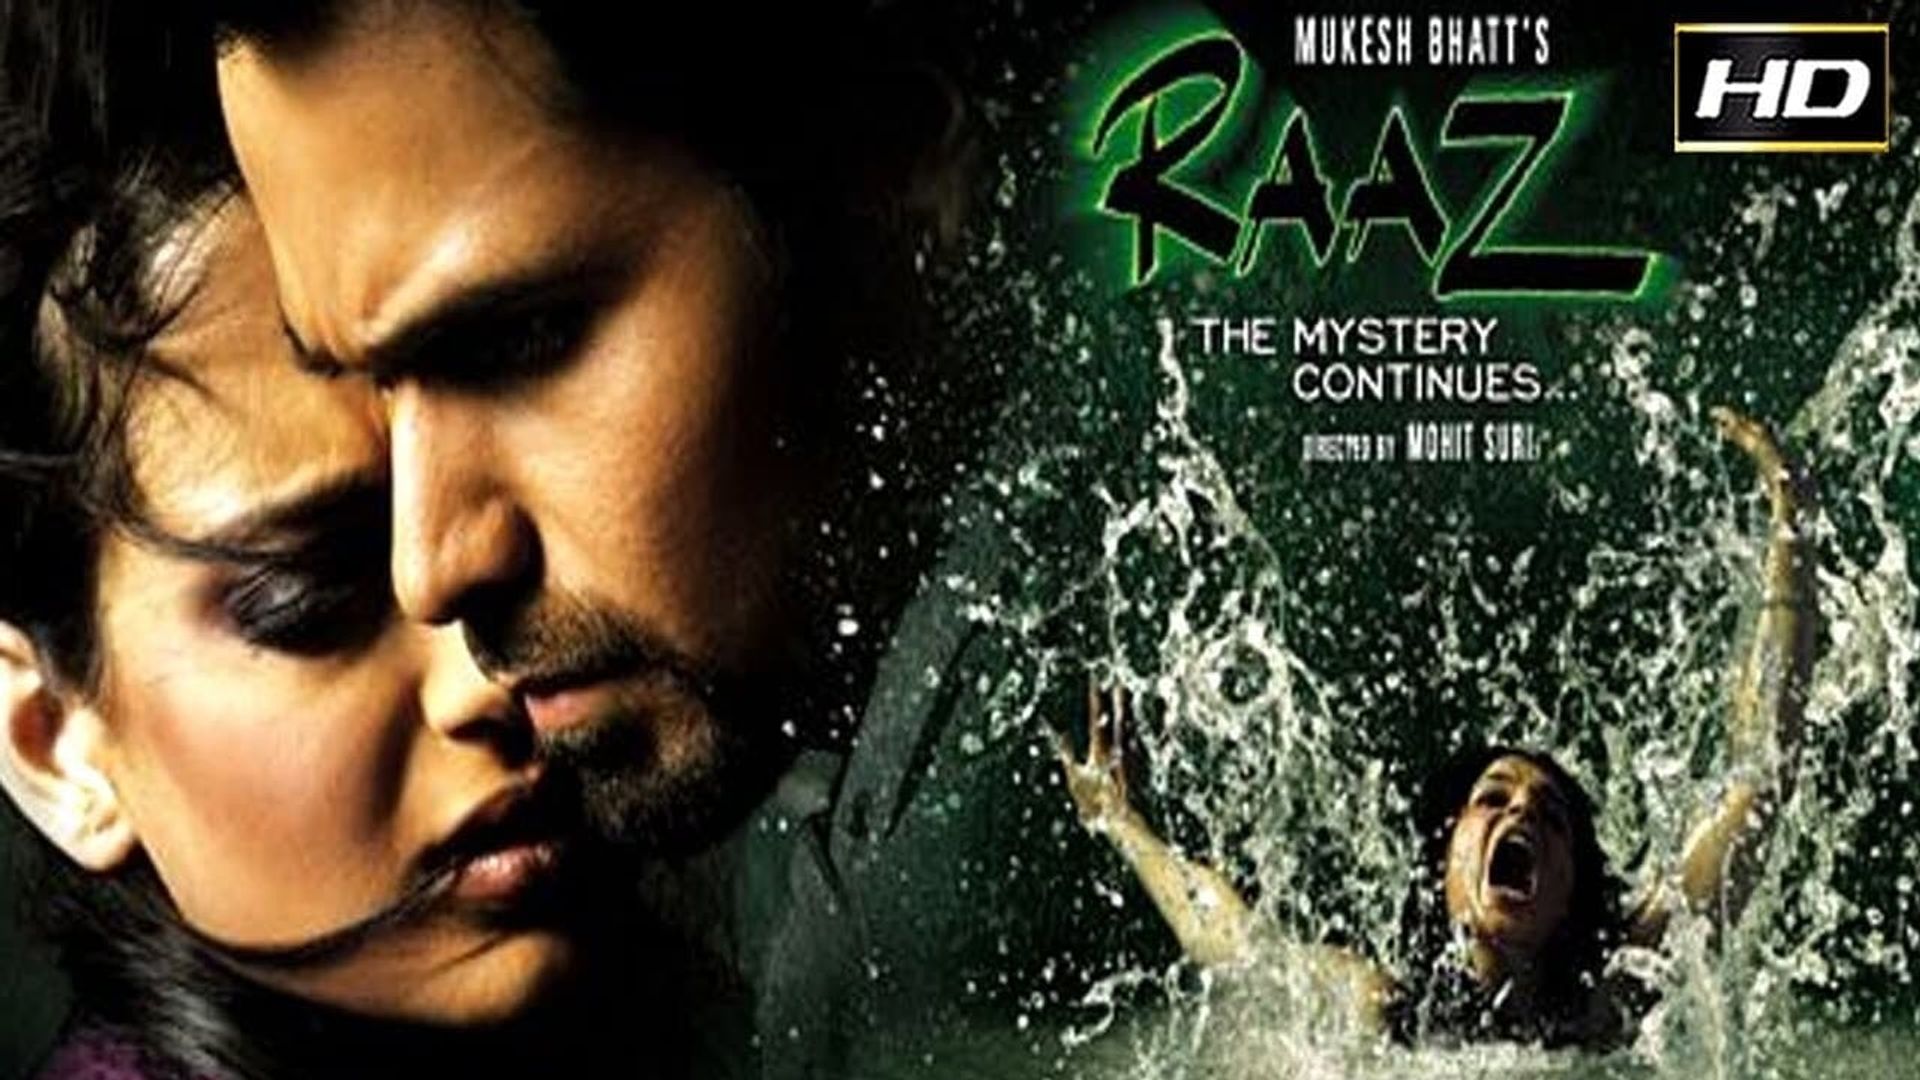 Raaz: The Mystery Continues background